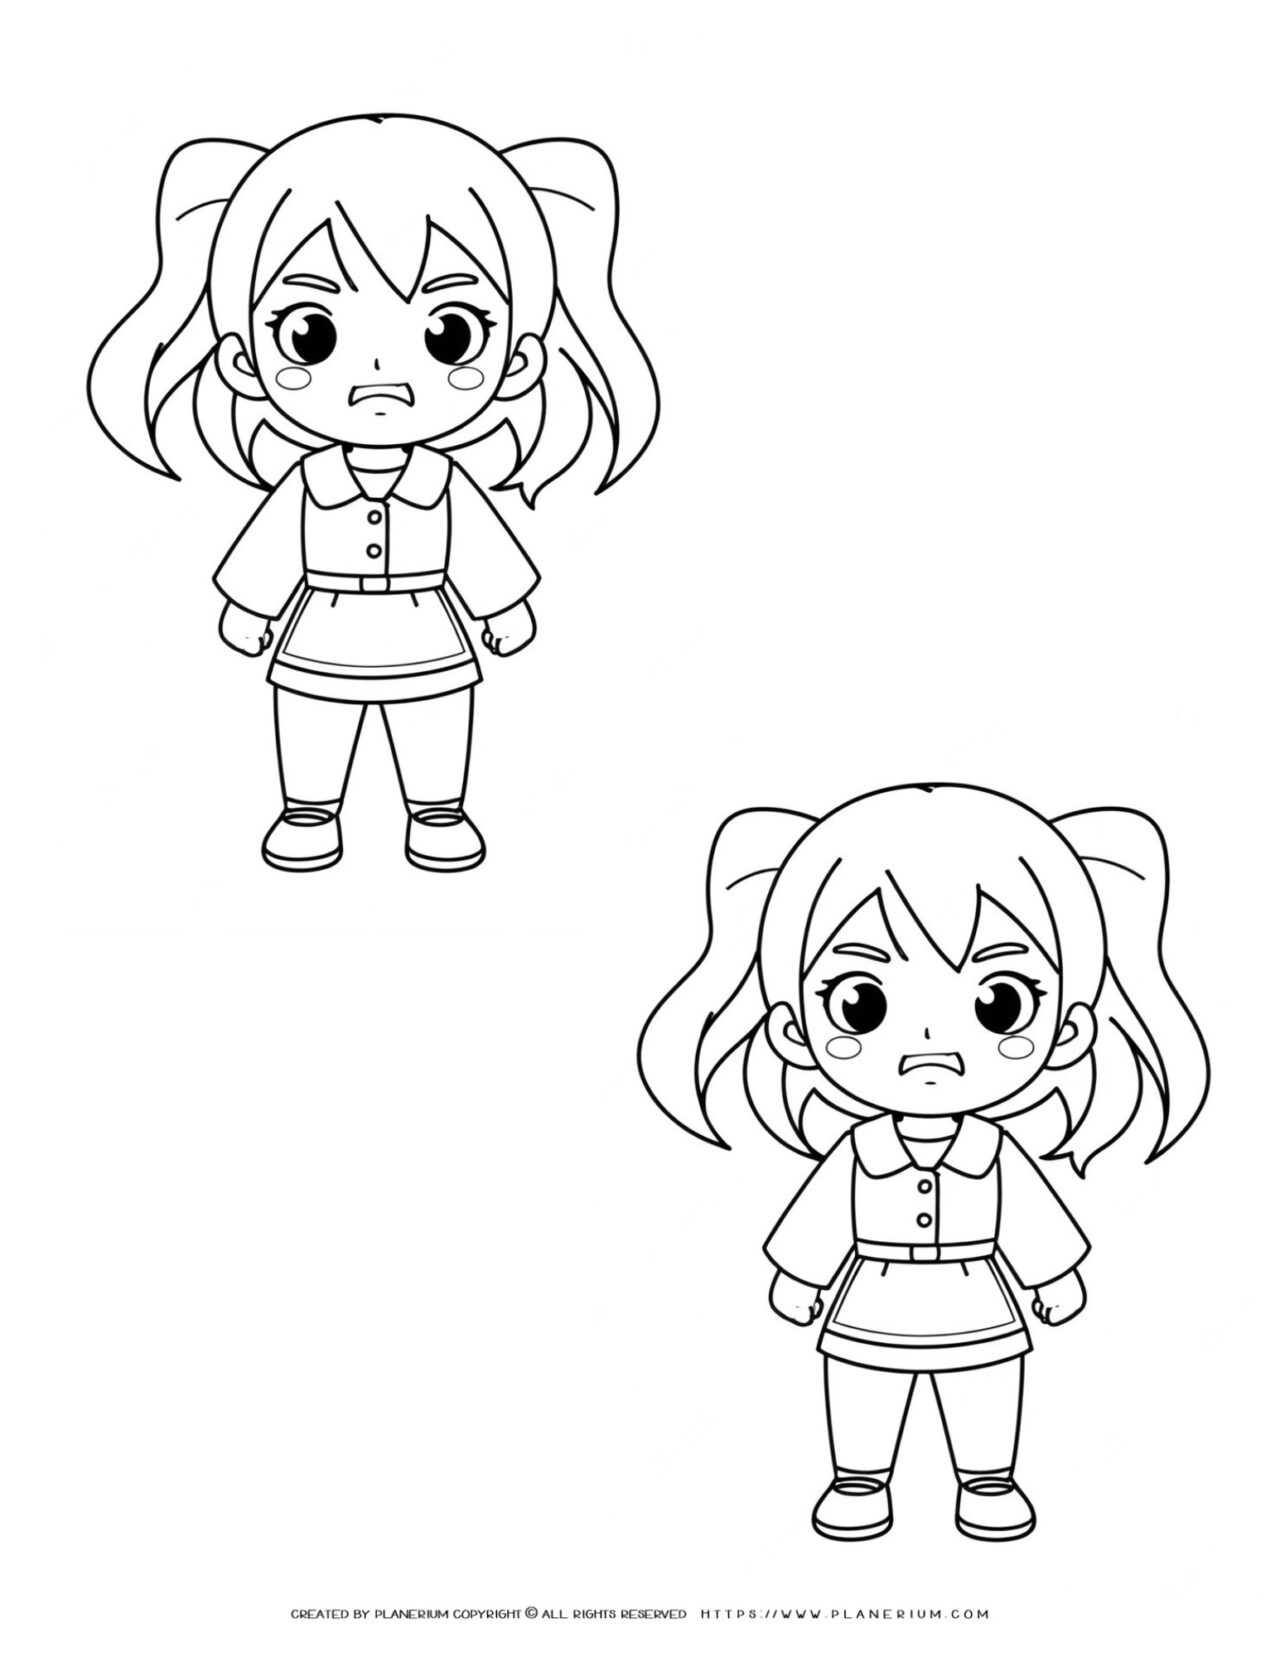 two-angry-girl-anime-style-outlines